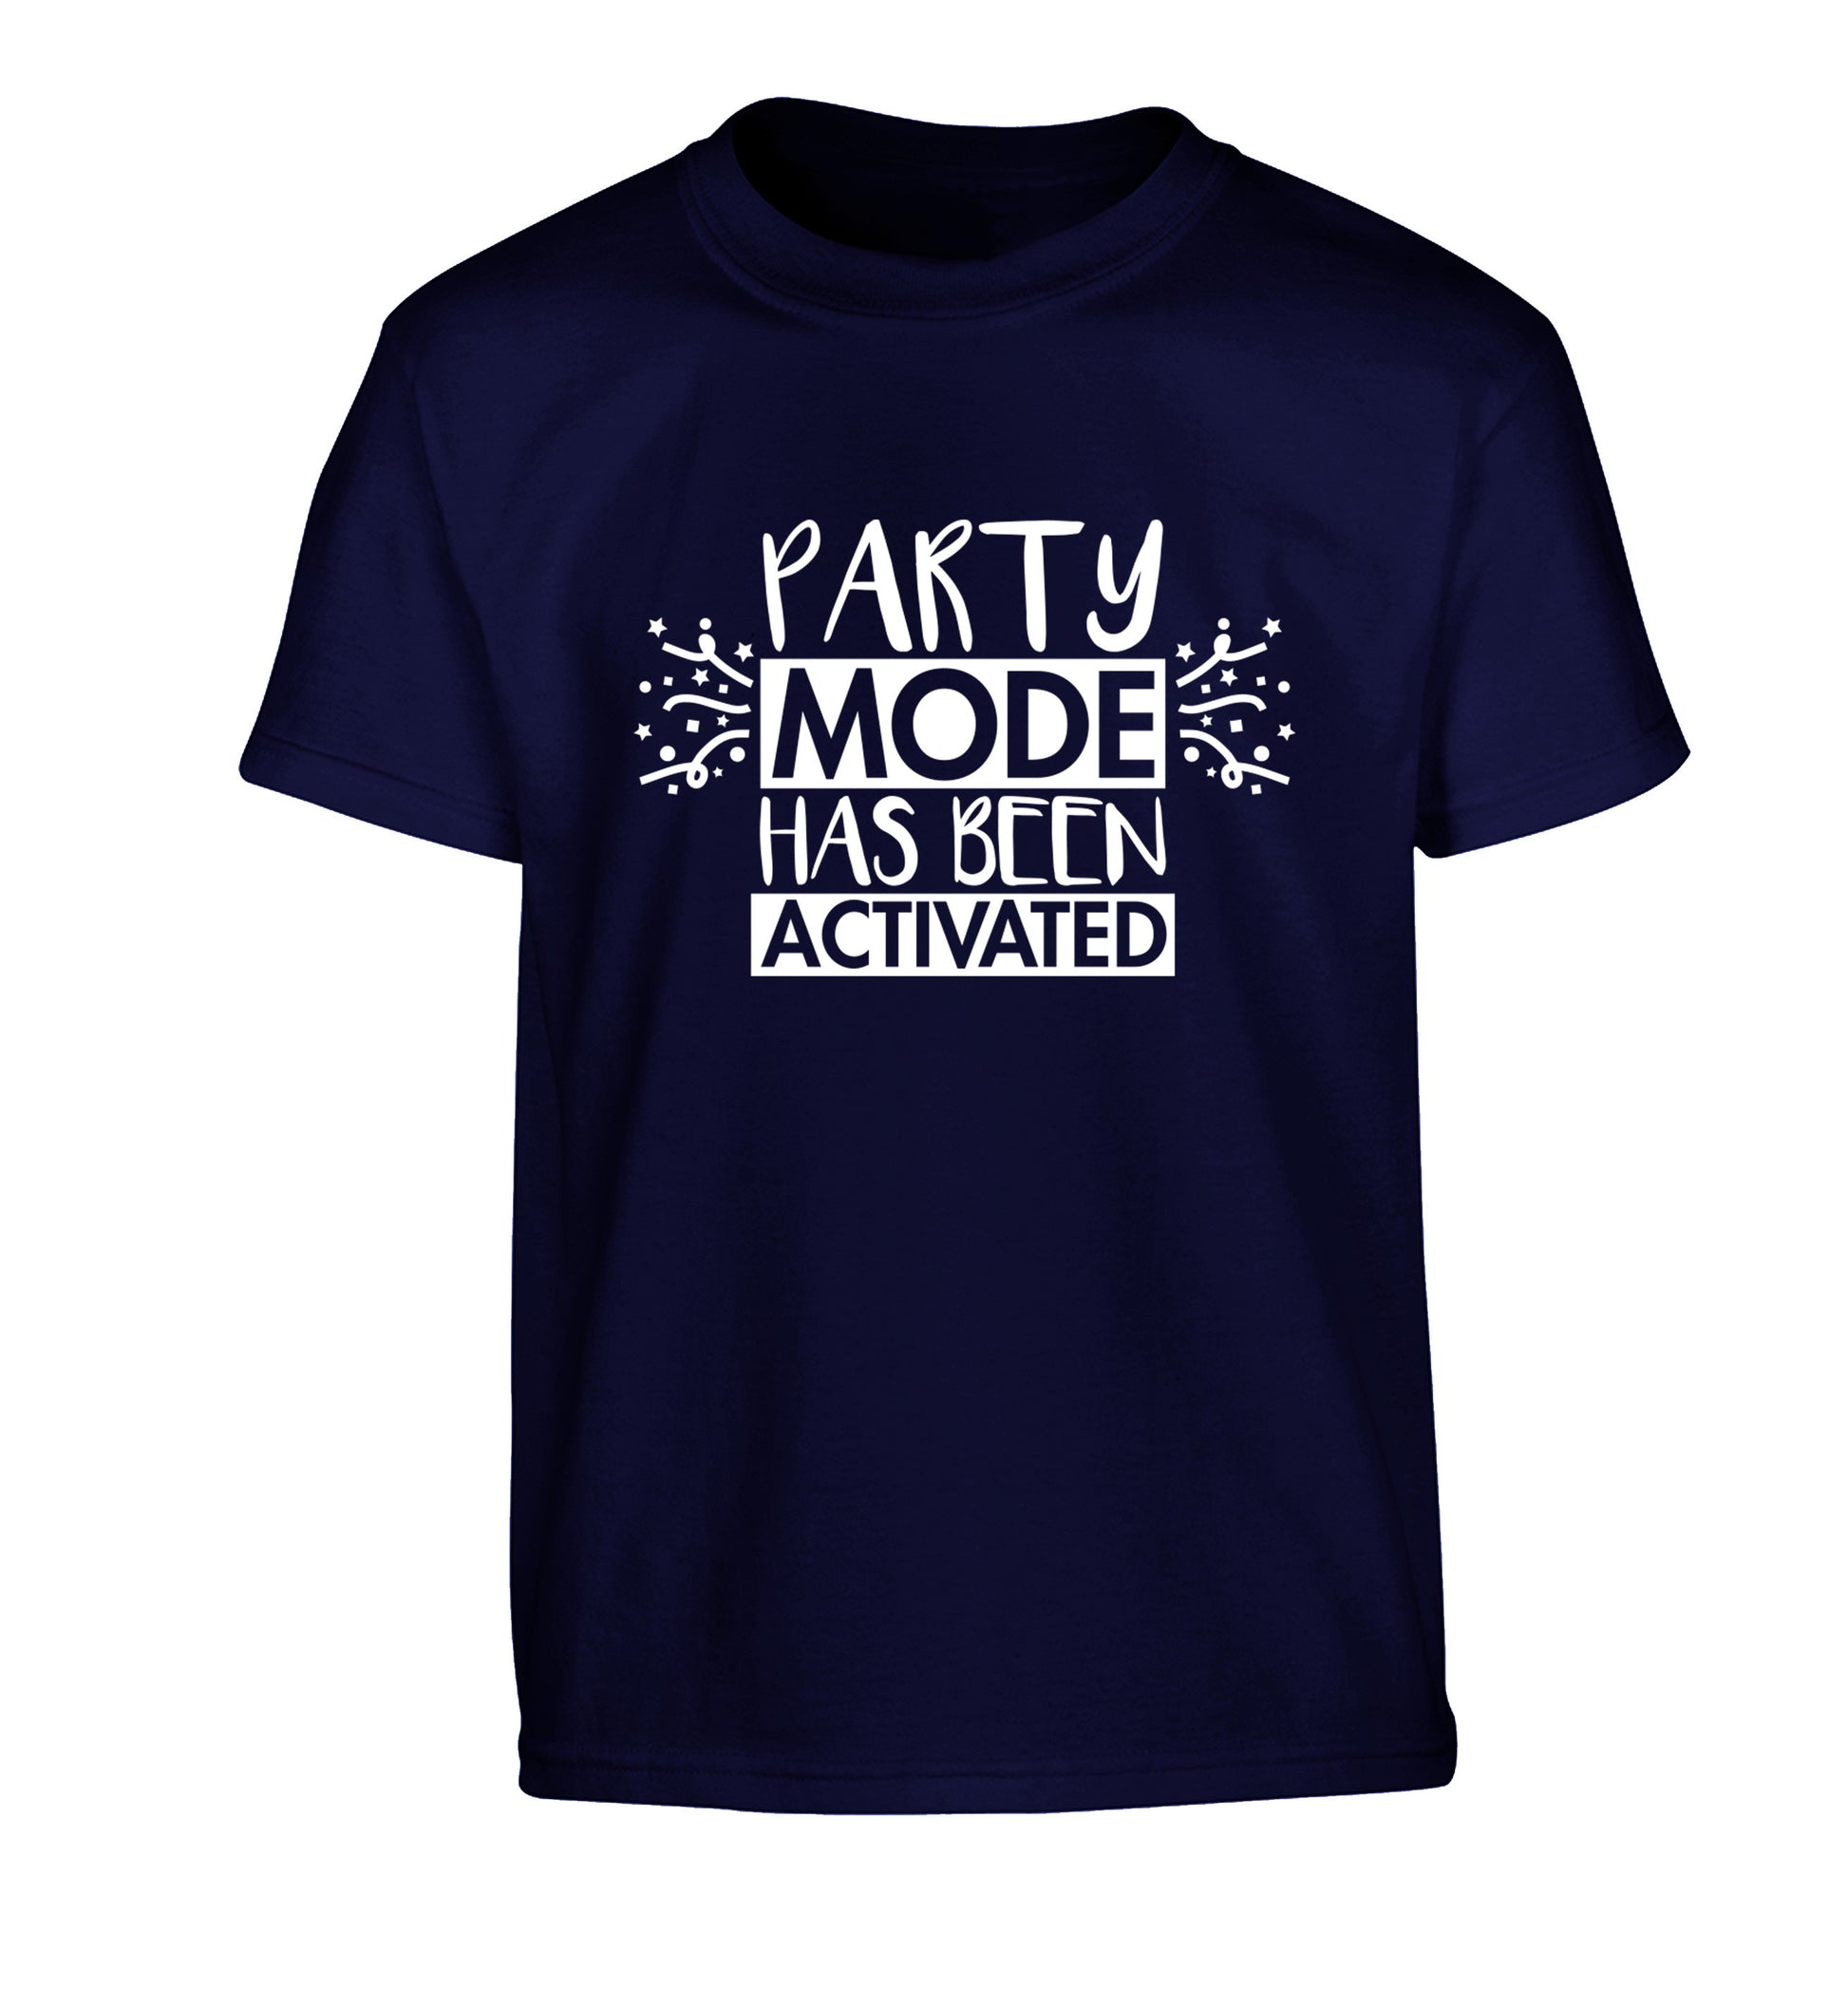 Please do not disturb party mode has been activated Children's navy Tshirt 12-14 Years